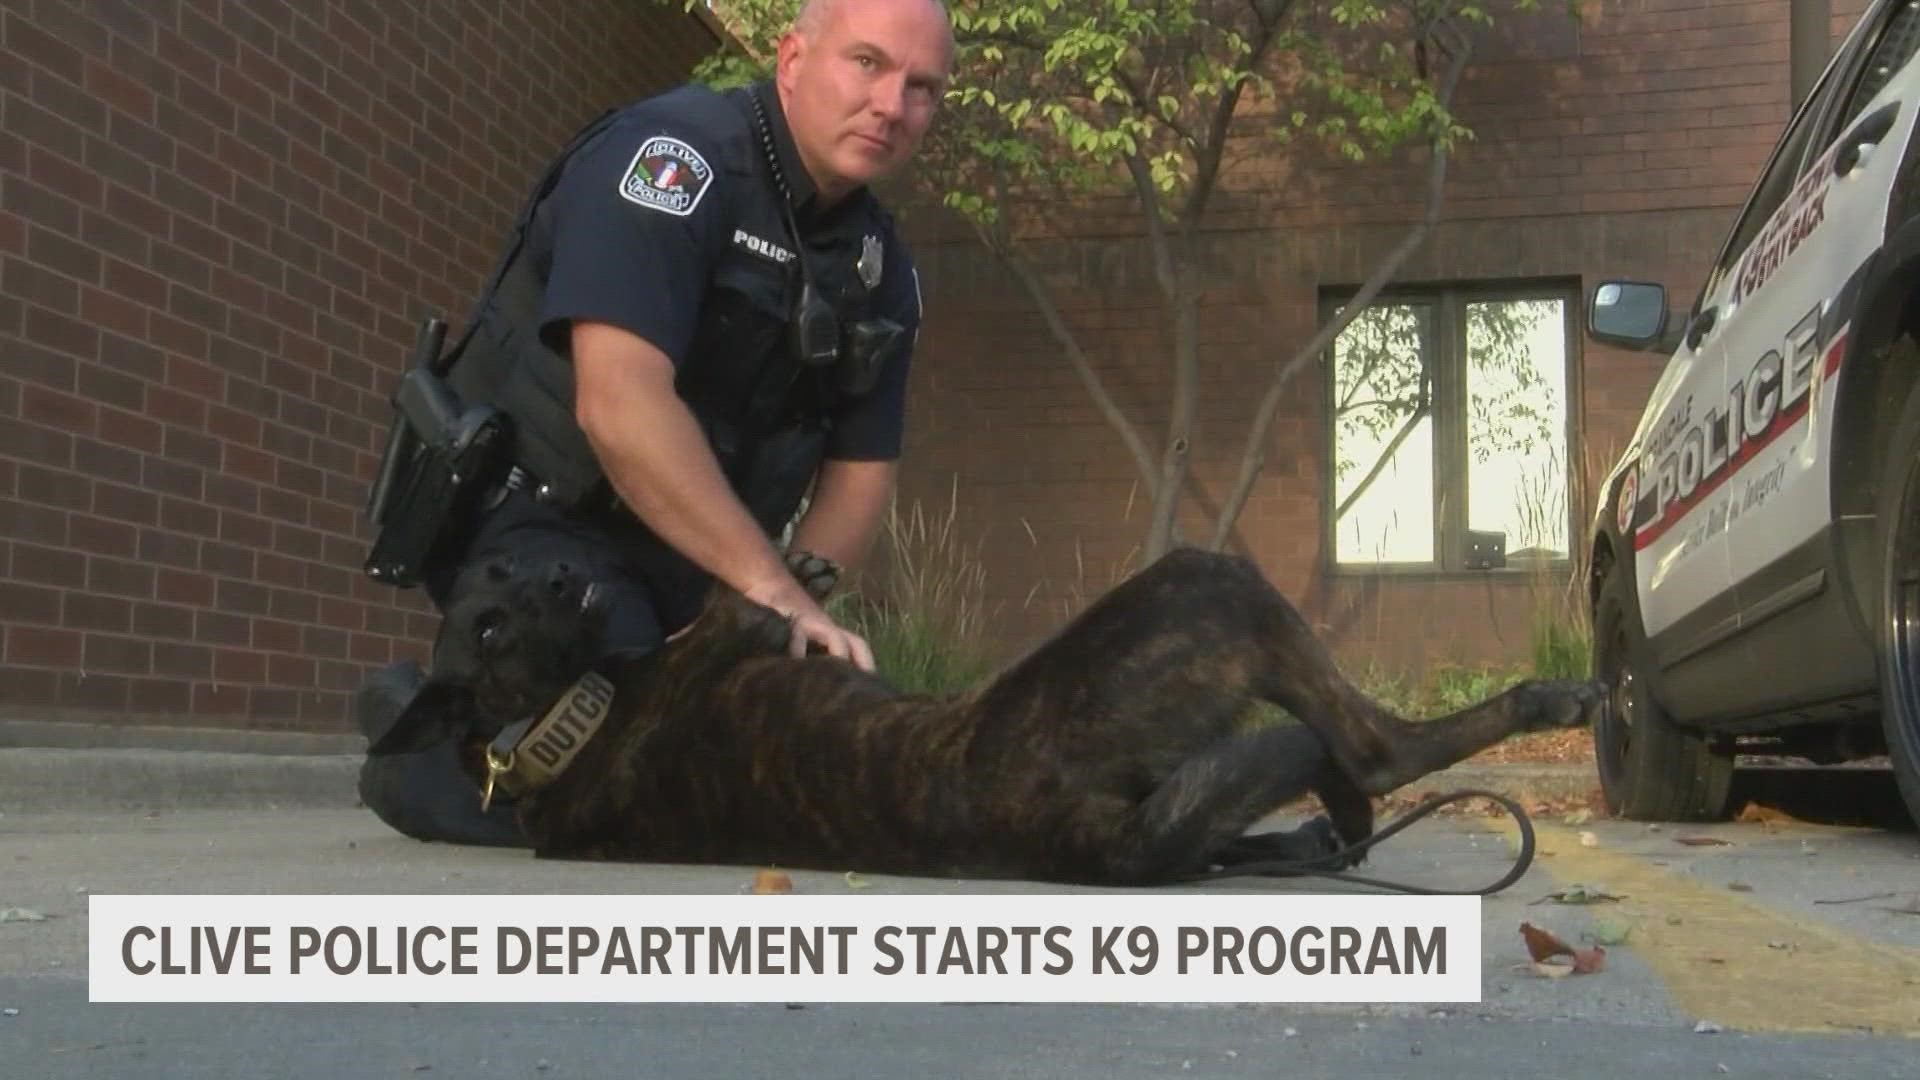 The Clive Police Department recently started a K9 program. K-9 Dutch was sworn in on September 10, and since being sworn in has been used seven times.